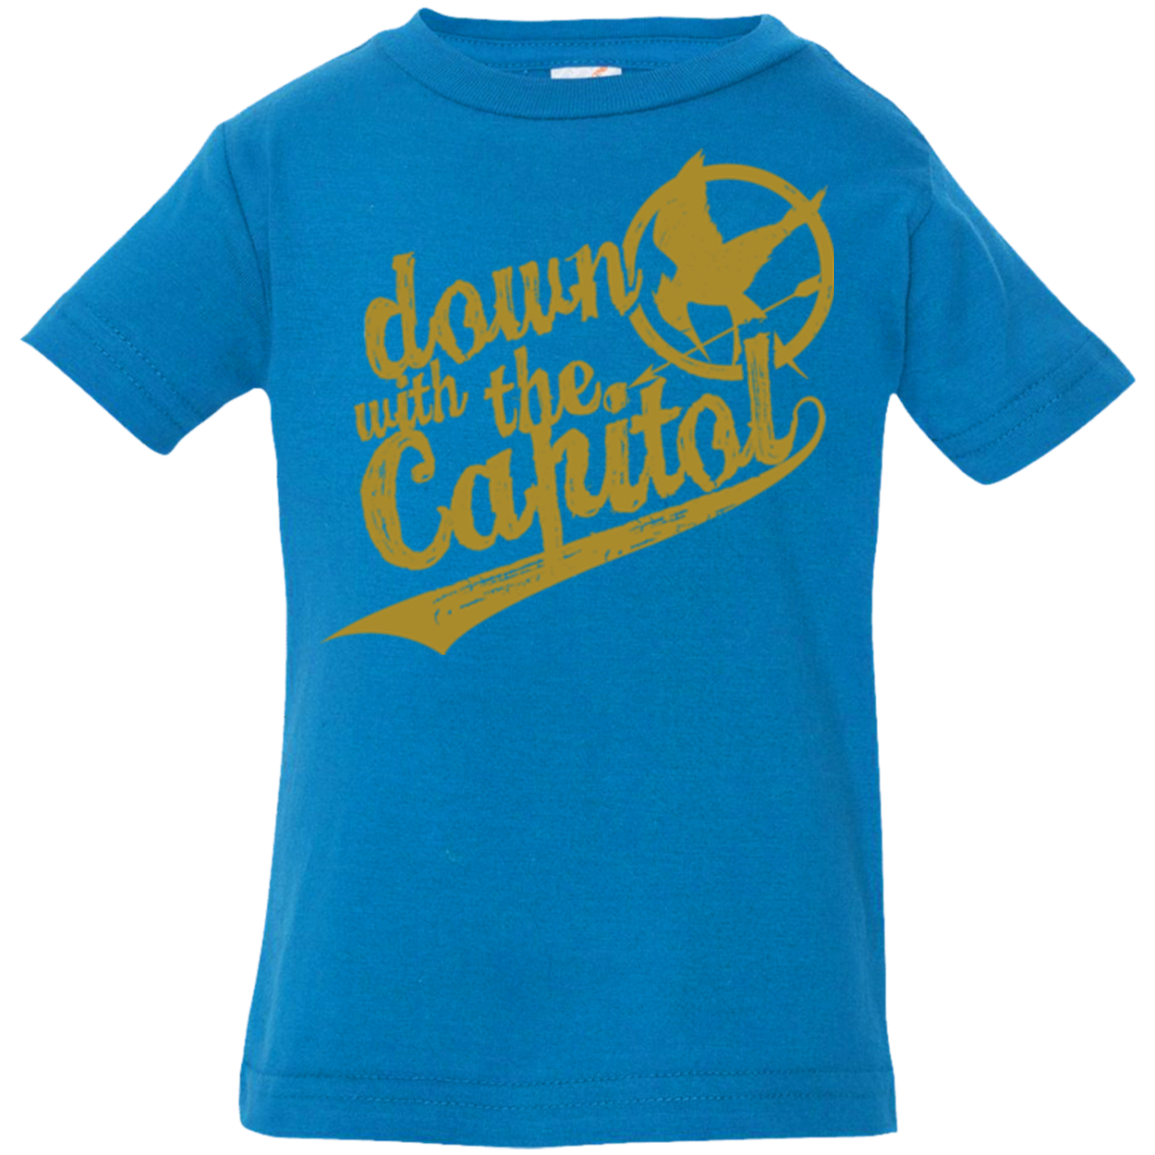 Down with the Capitol Infant PremiumT-Shirt